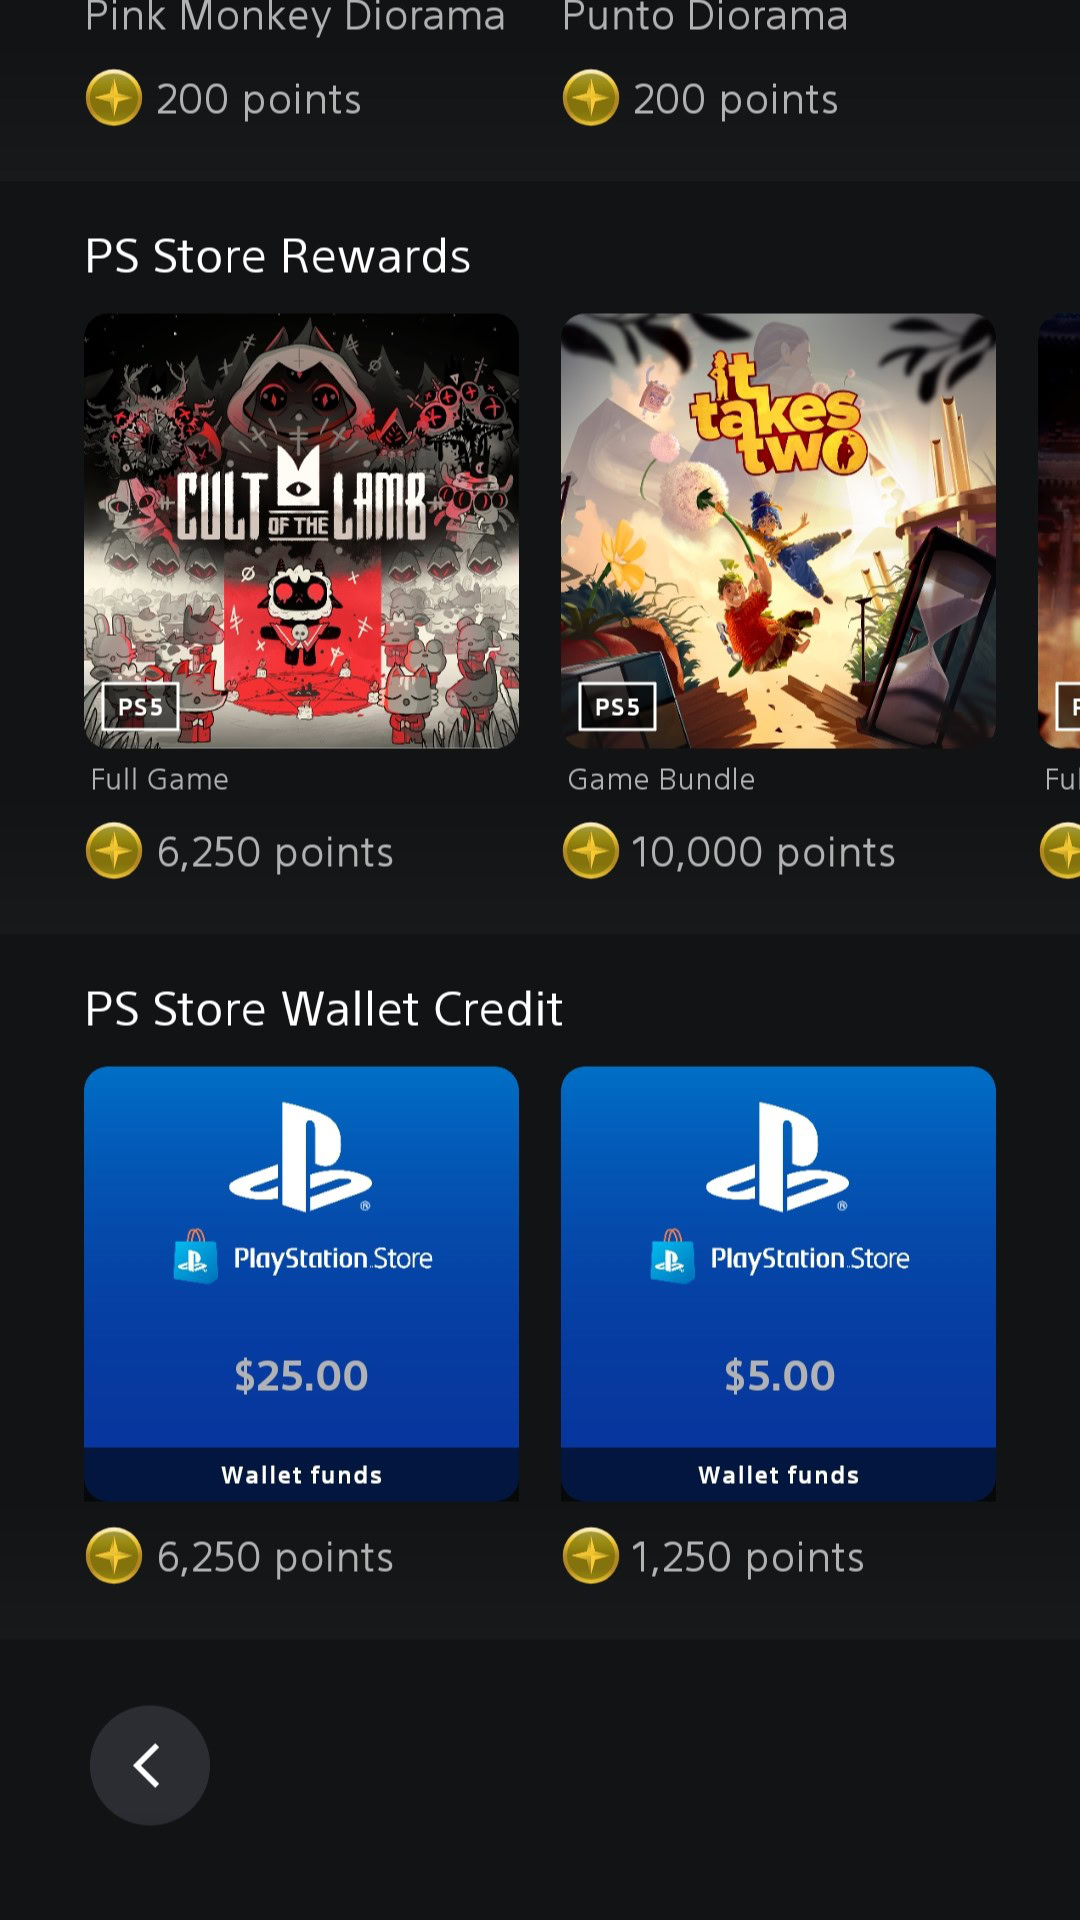 Essential Picks promotion comes to PlayStation Store – PlayStation